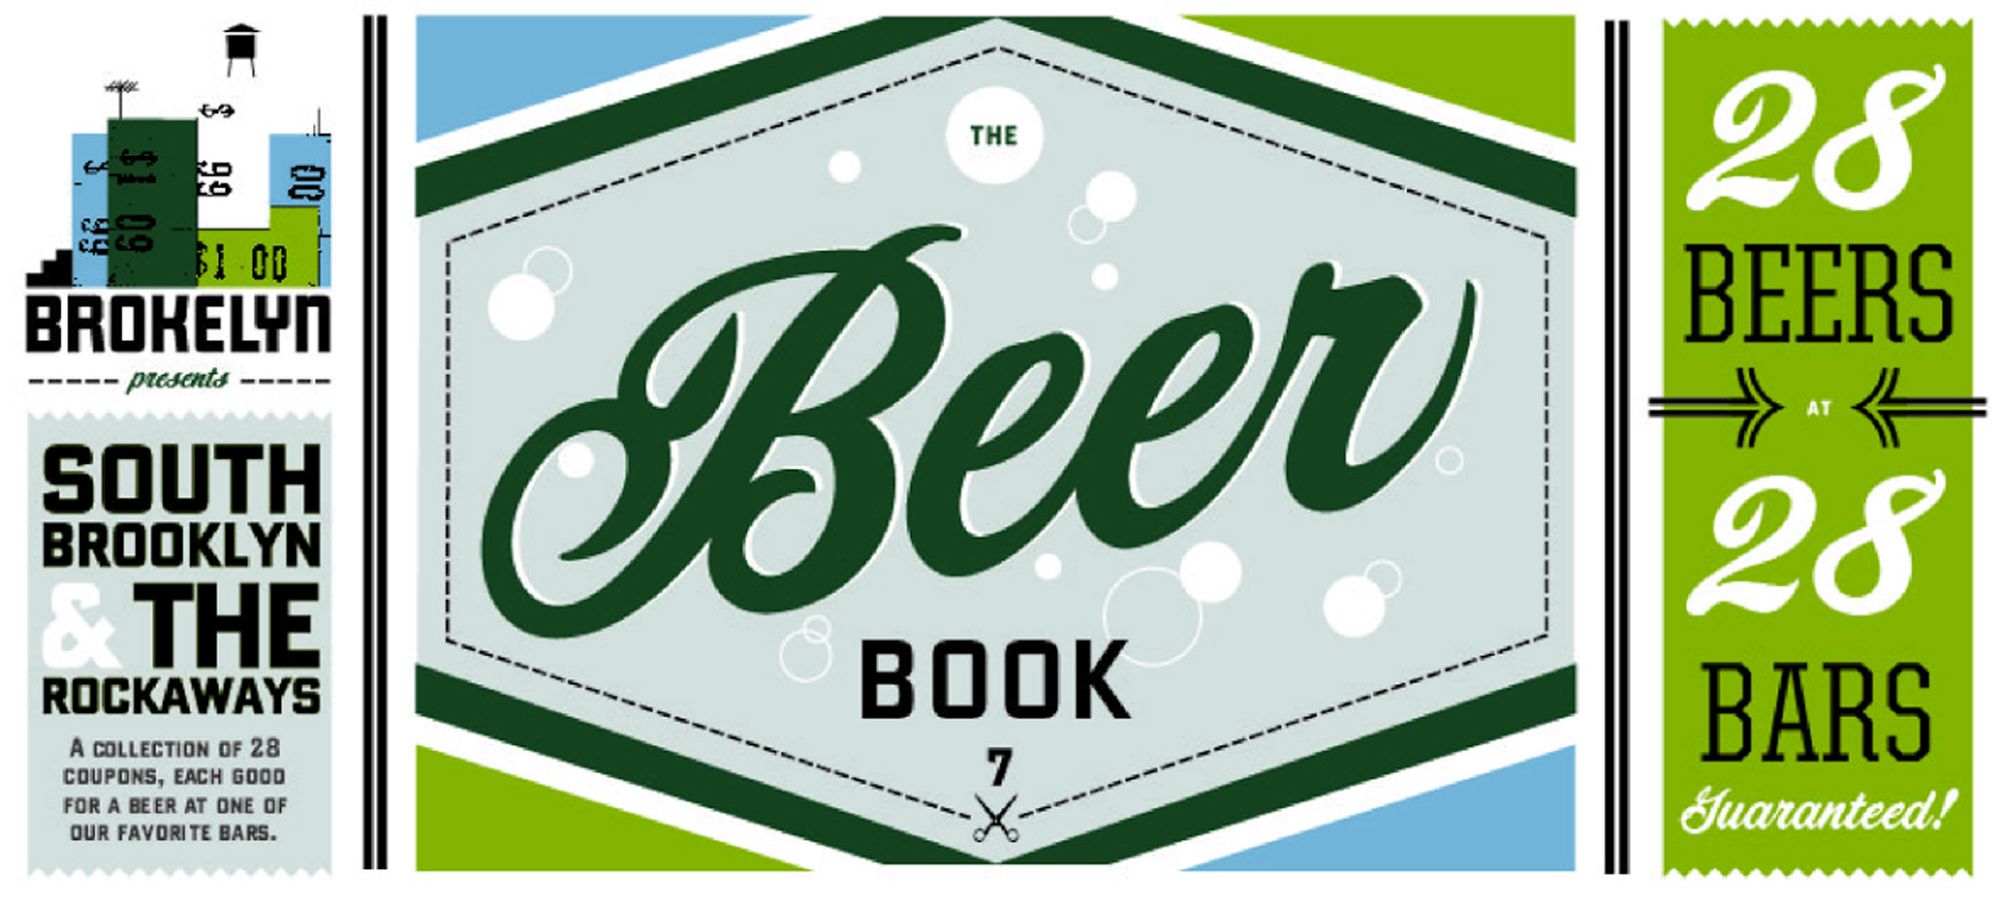 Cyber Monday Deal: 20% Off The Southern Brooklyn Beer Book, Normally 28 Brews For $28